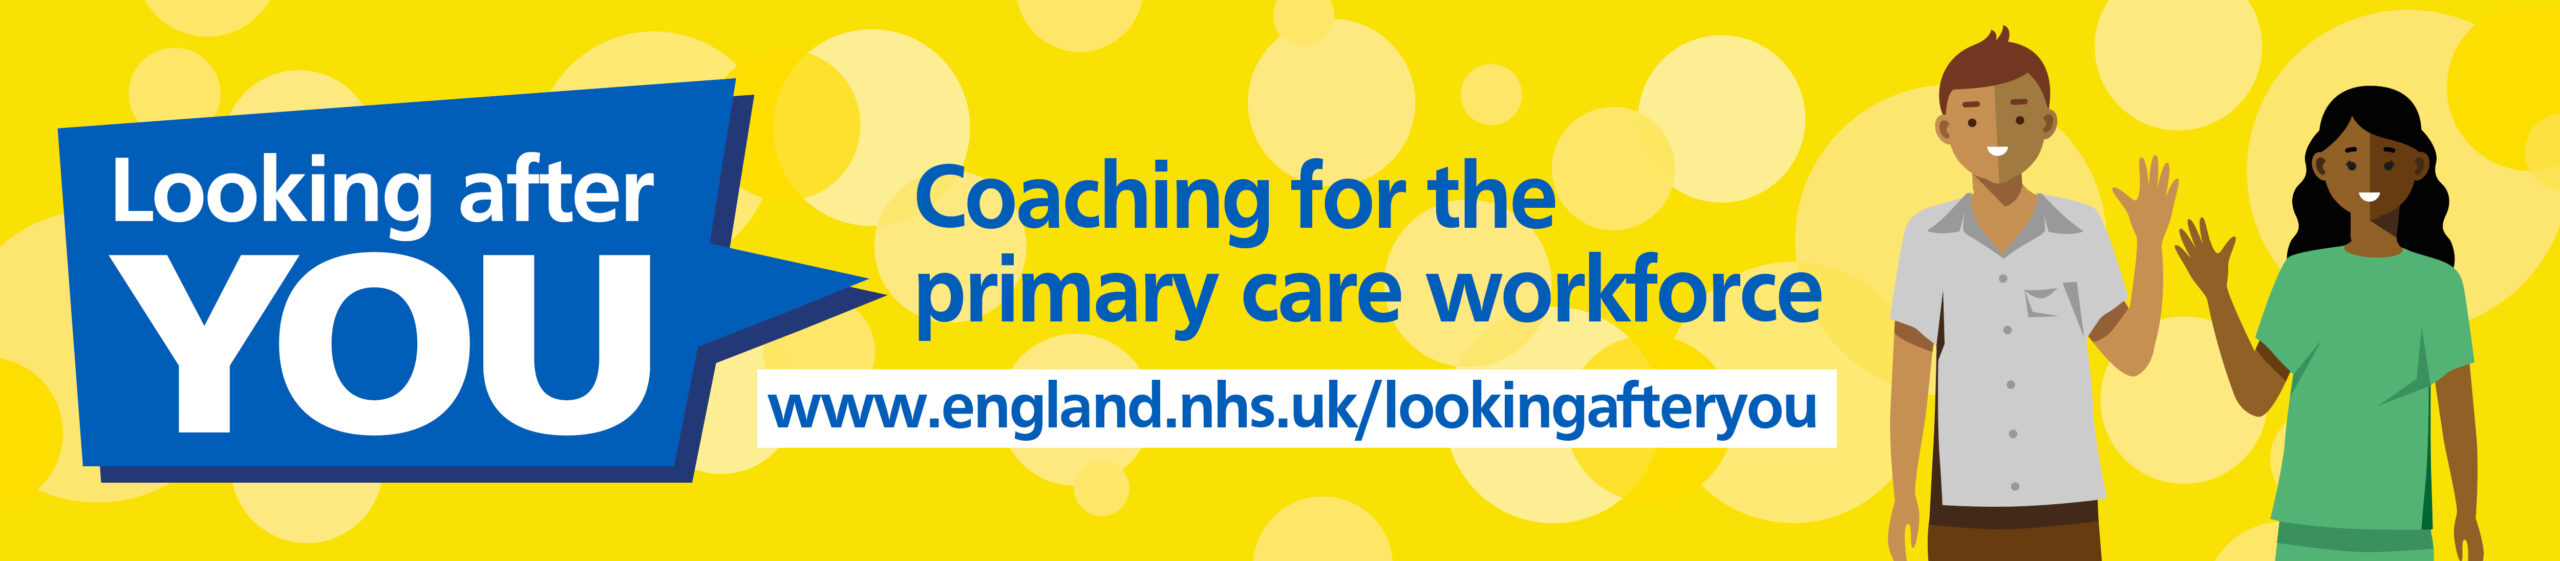 Looking after you: confidential coaching and support for the primary care workforce: banner image